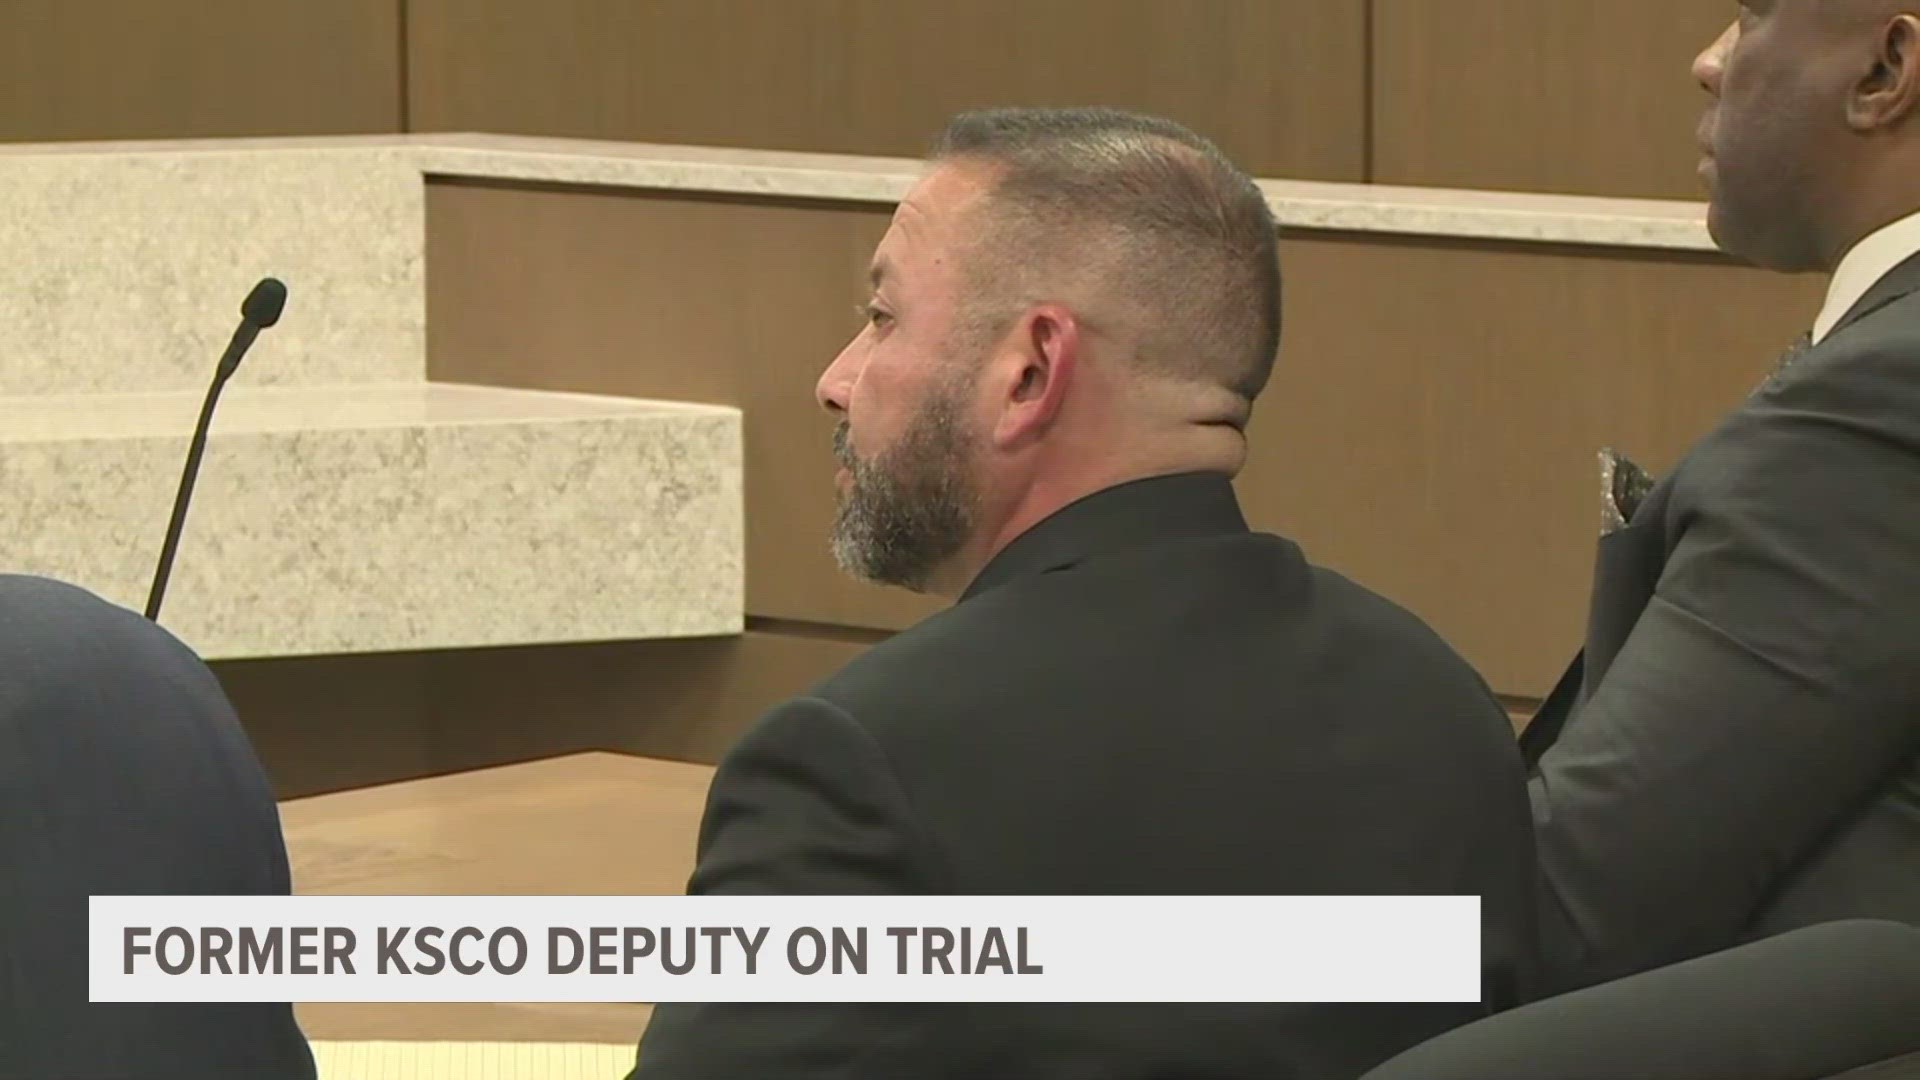 The trial for an ex-Kent County deputy accused of assaulting a paralyzed man in an alleged road rage incident began Friday.